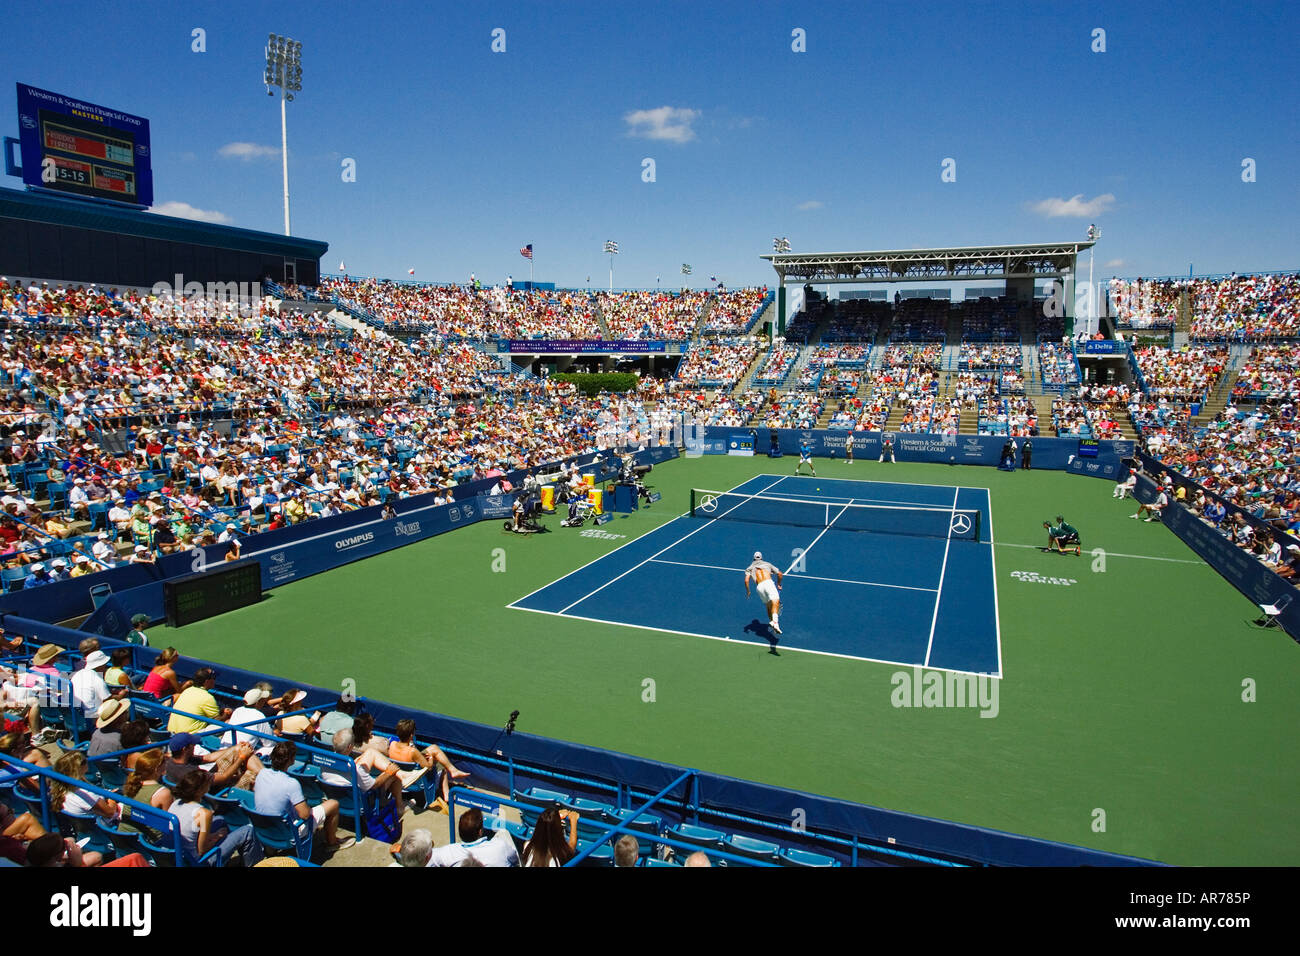 Center Court is full of tennis fans as they watch doubles match at the  Western and Southern Financial ATP Tournament Cincinnati Stock Photo - Alamy